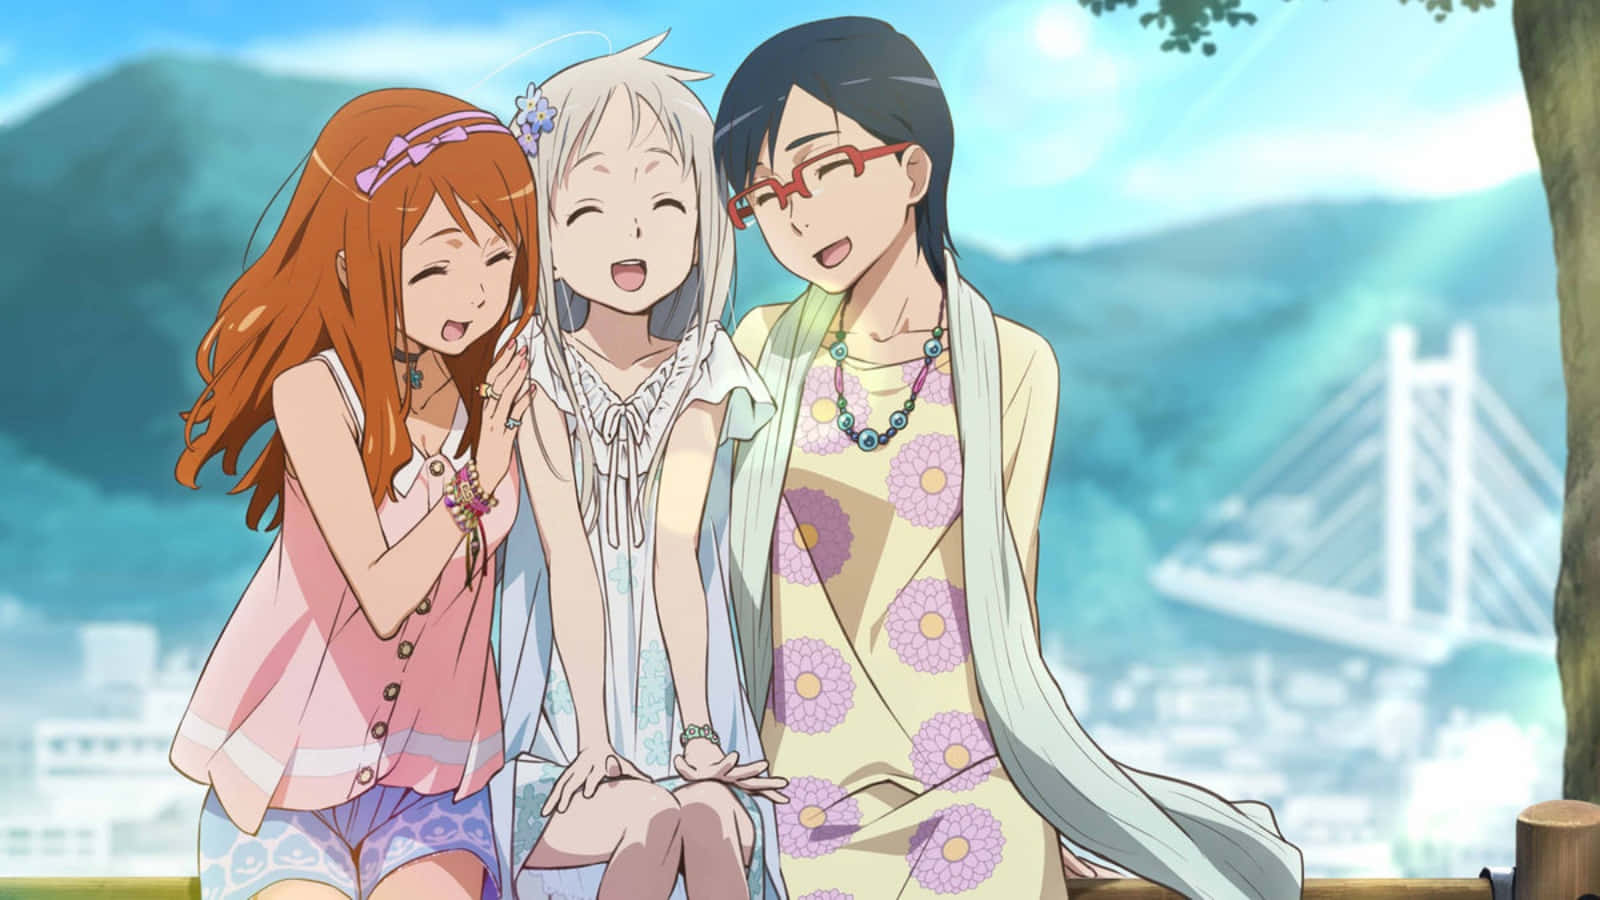 Super group of five childhood friends from Anohana